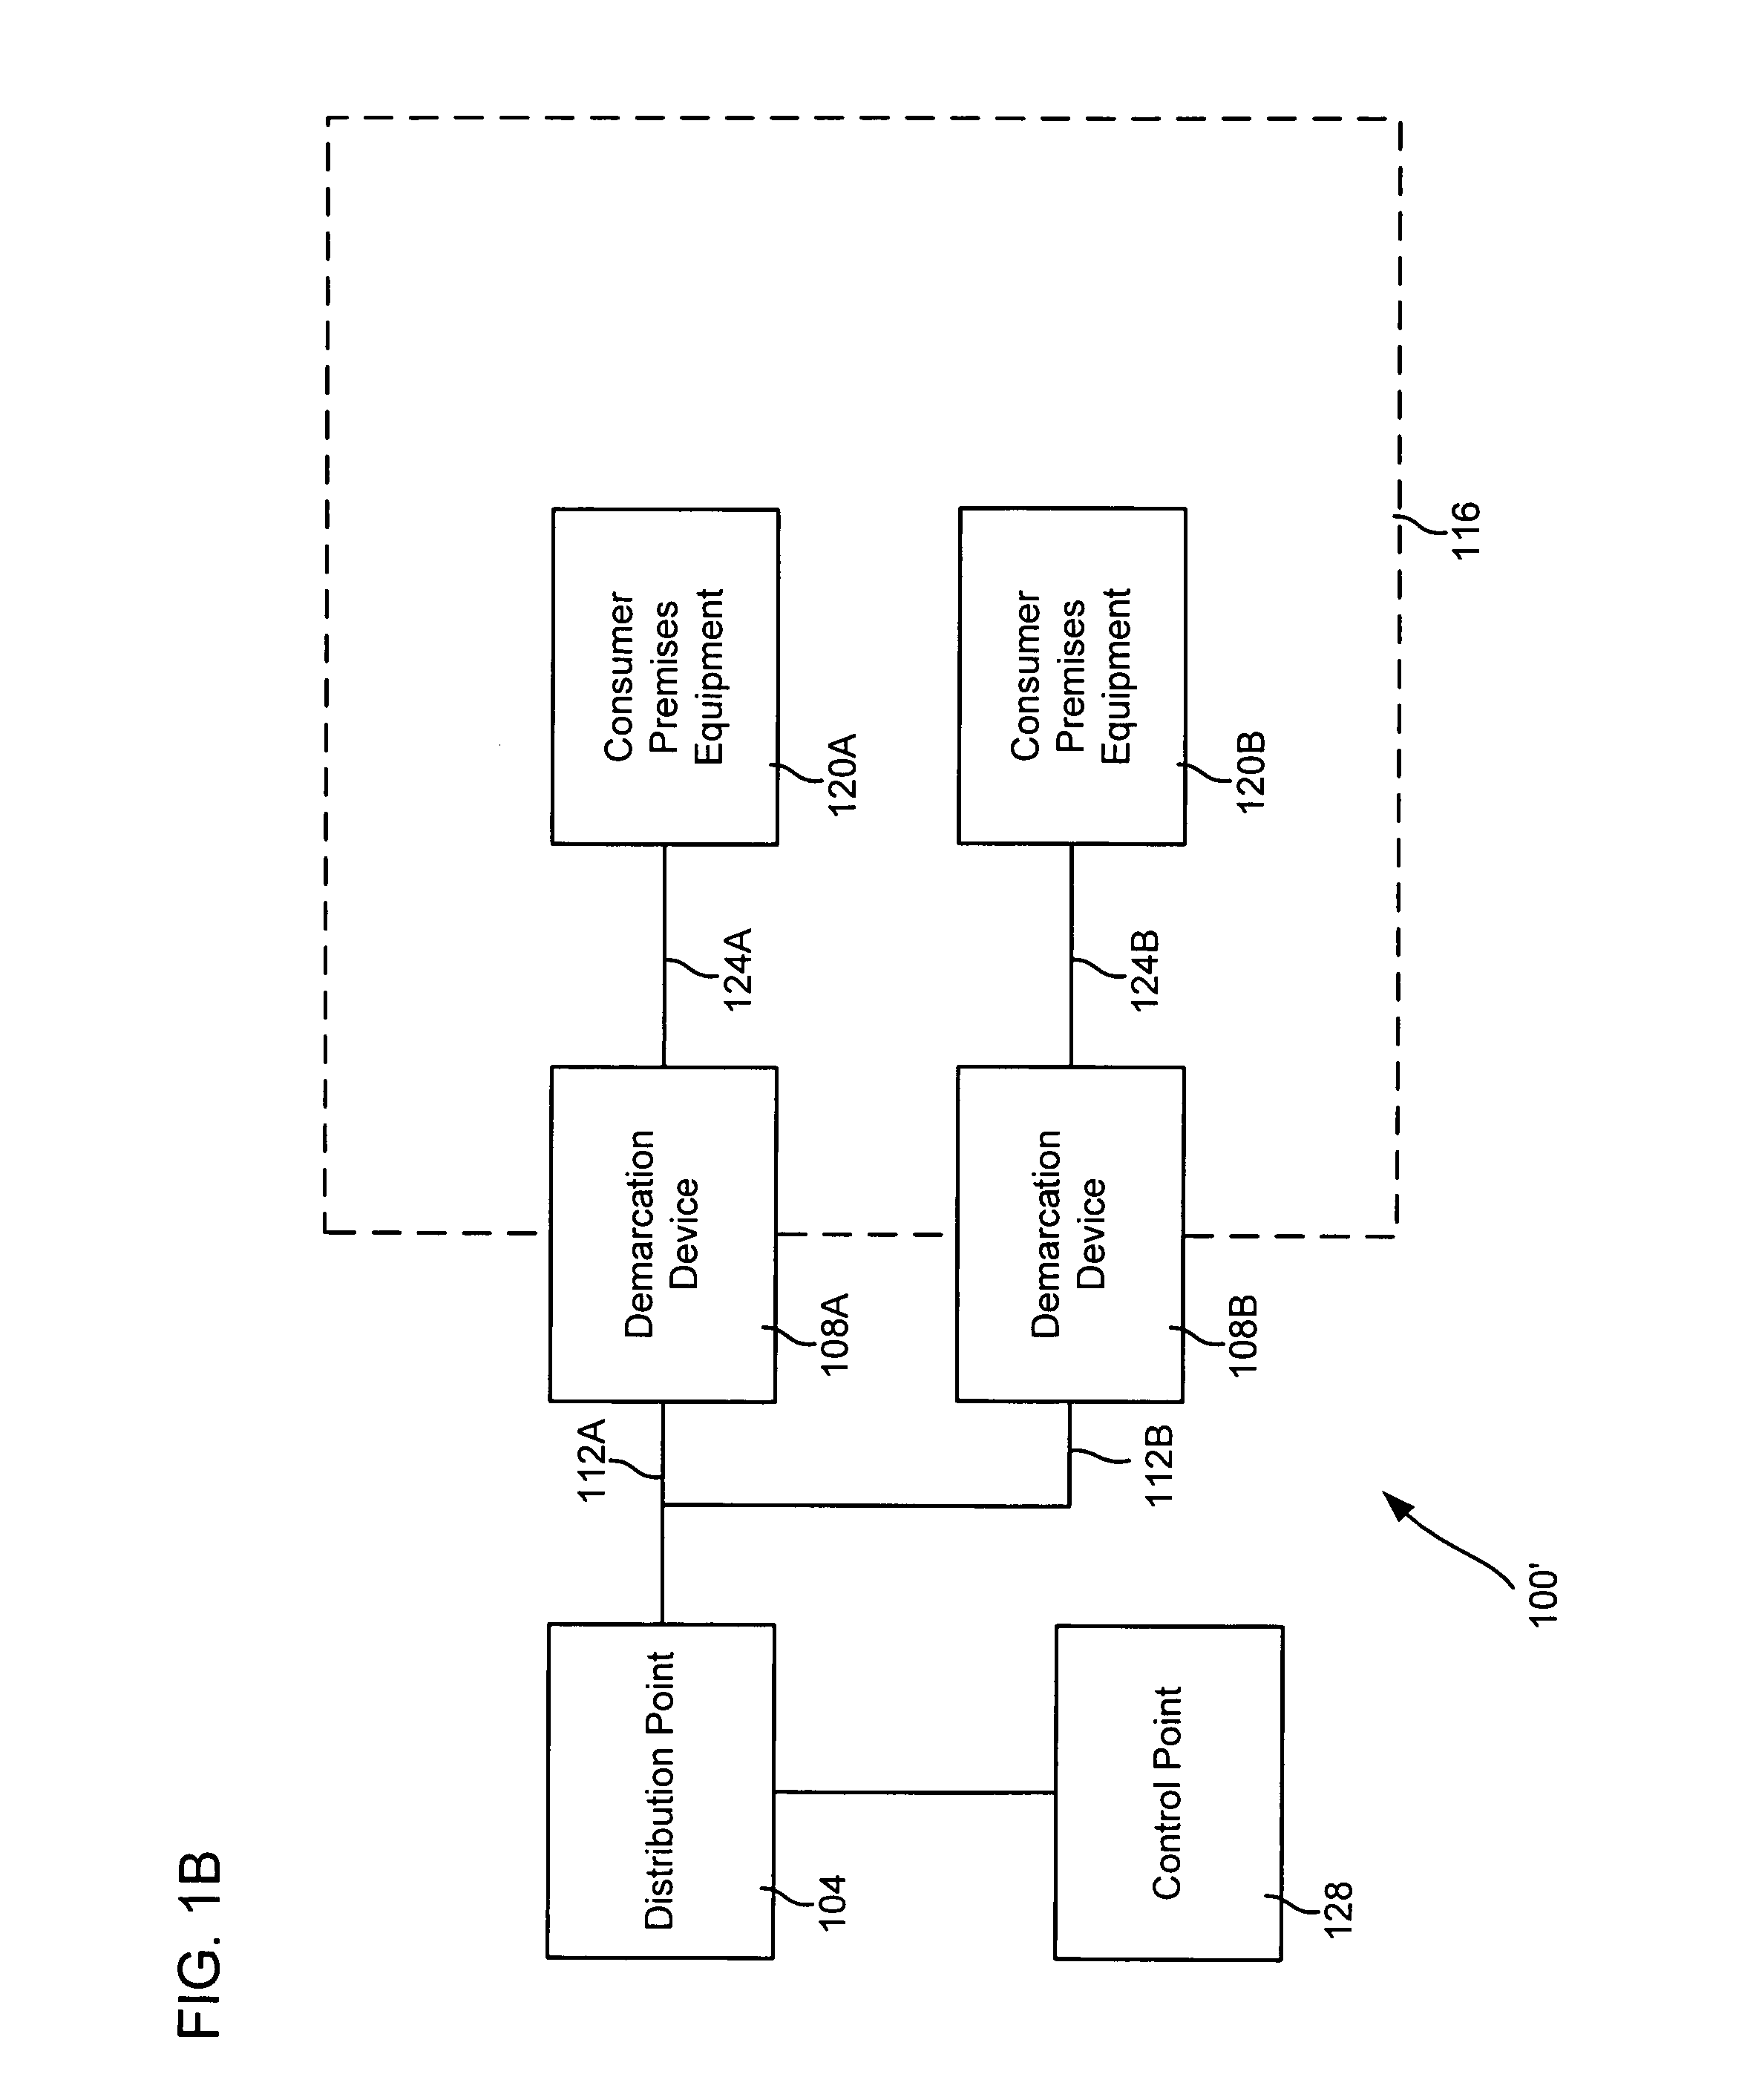 Environmentally-controlled network interface device and methods